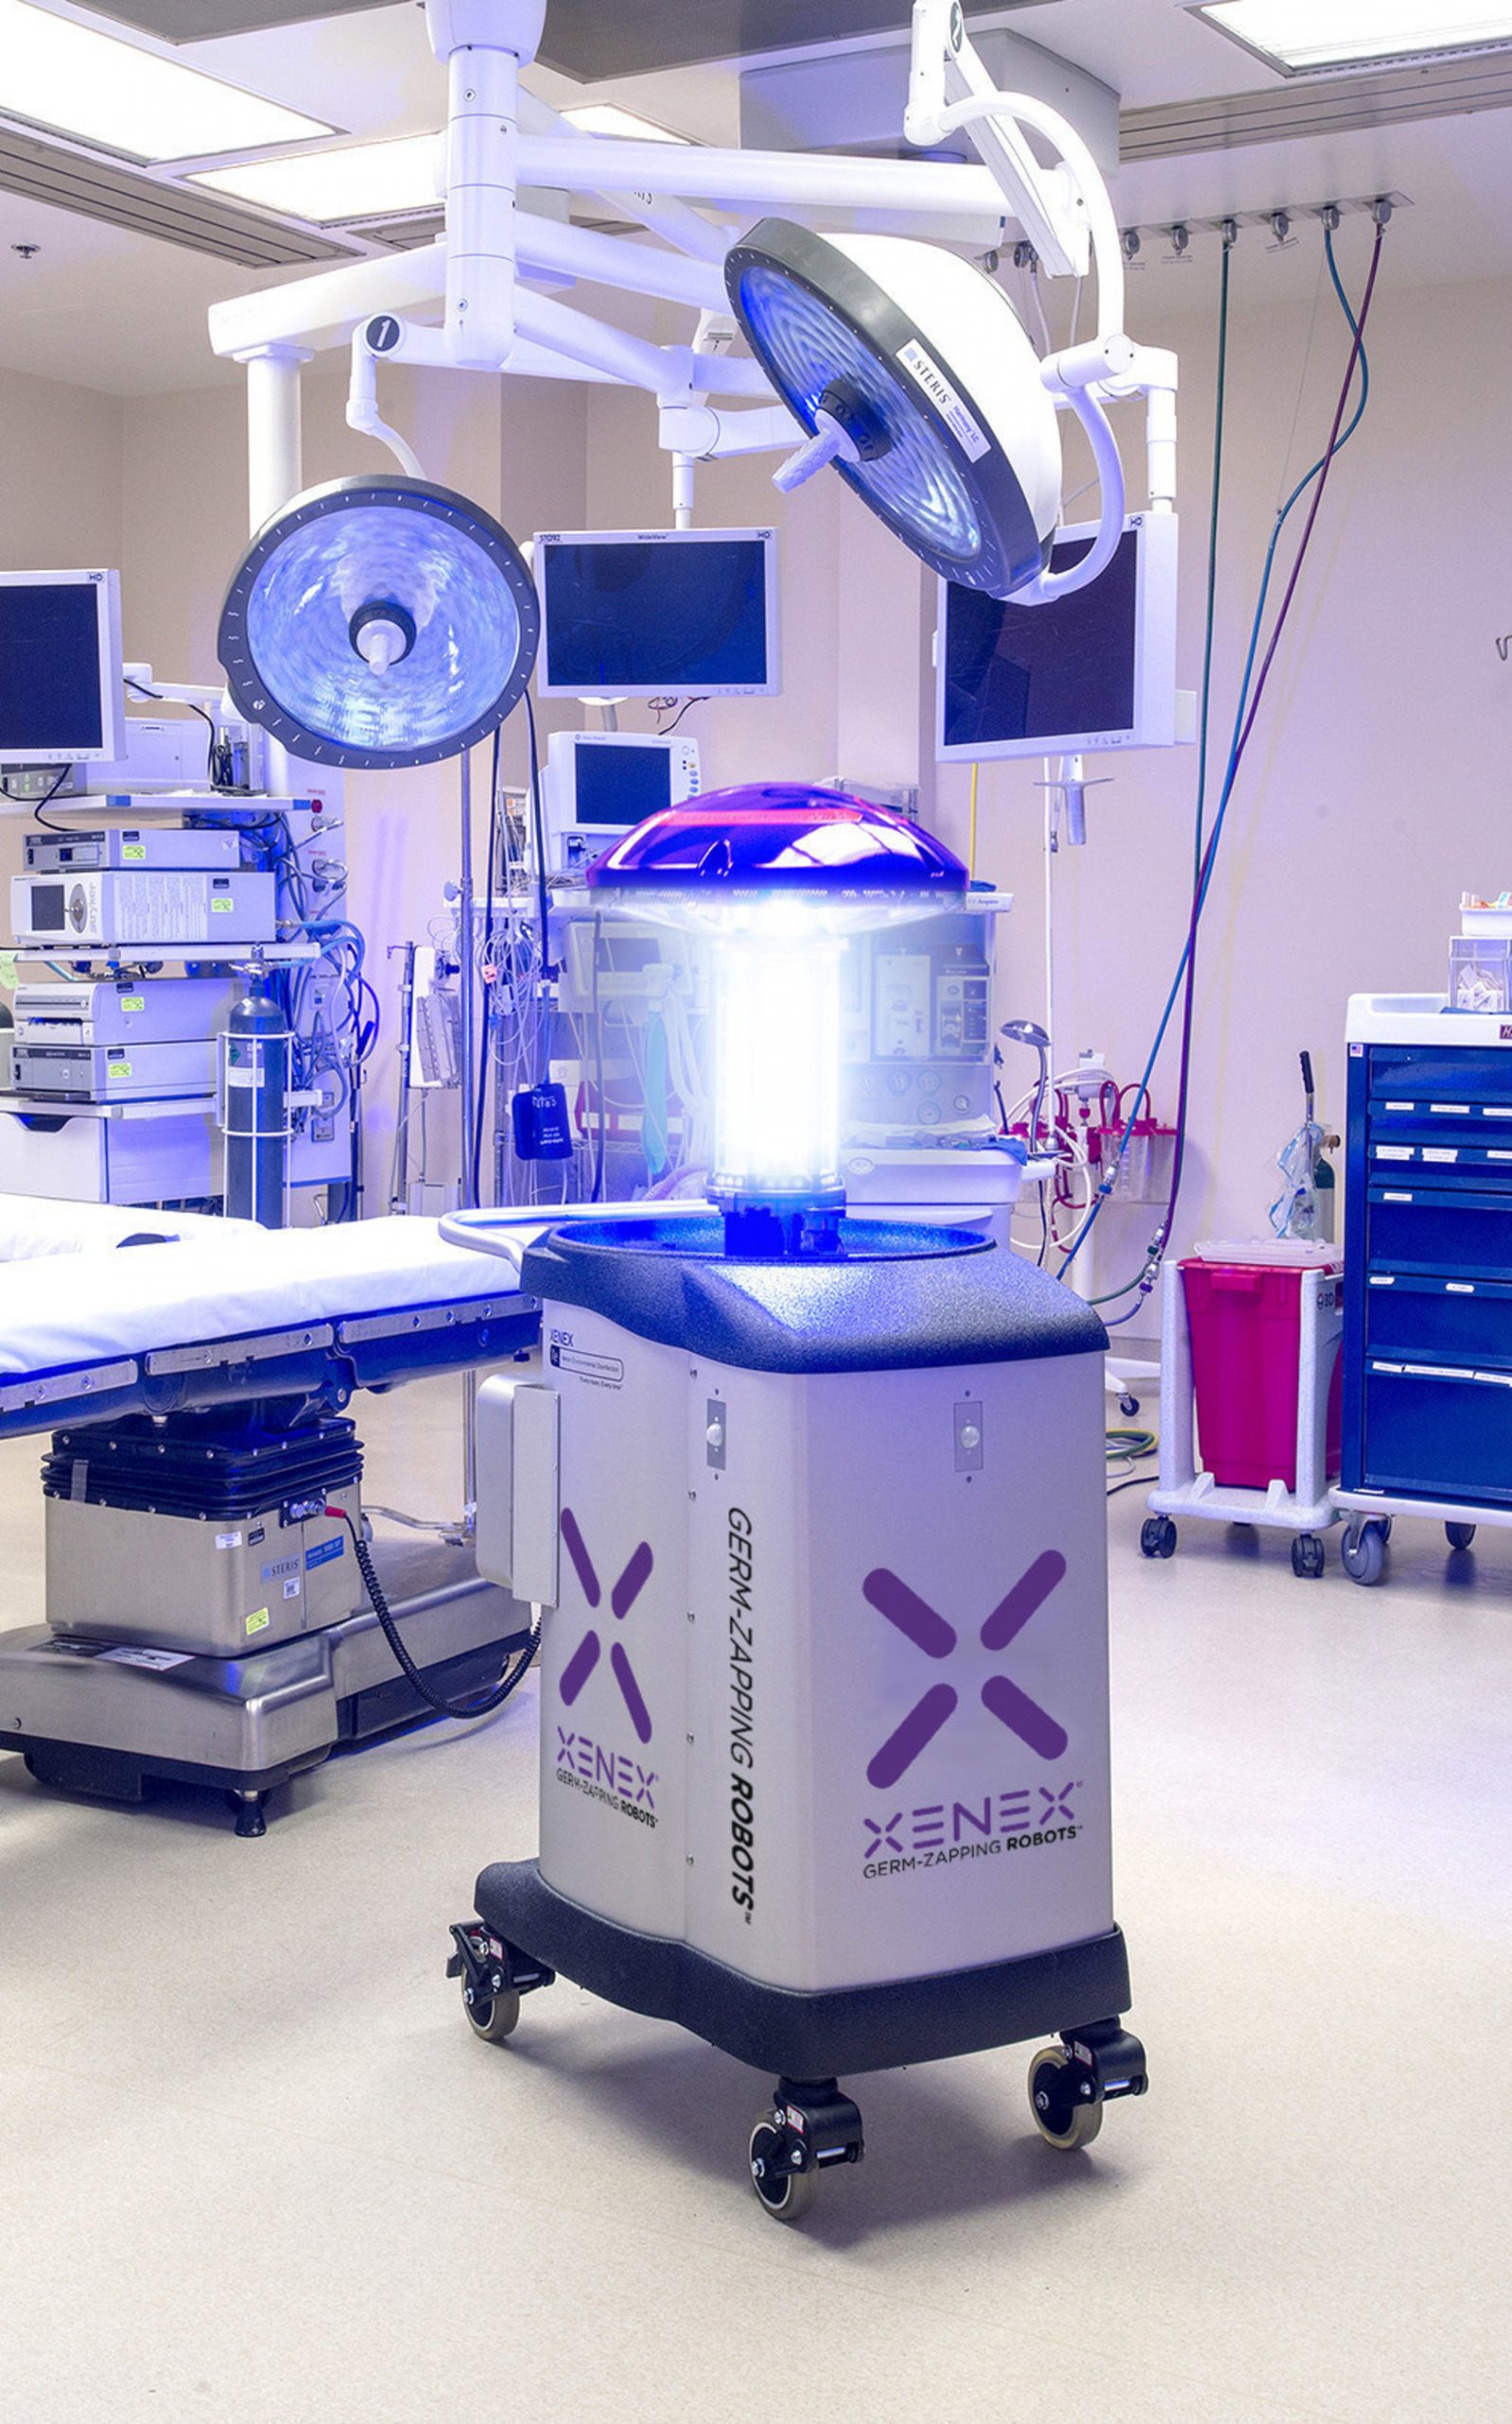 Xenon UV germ-killing Robots: Difference Between Different Technologies